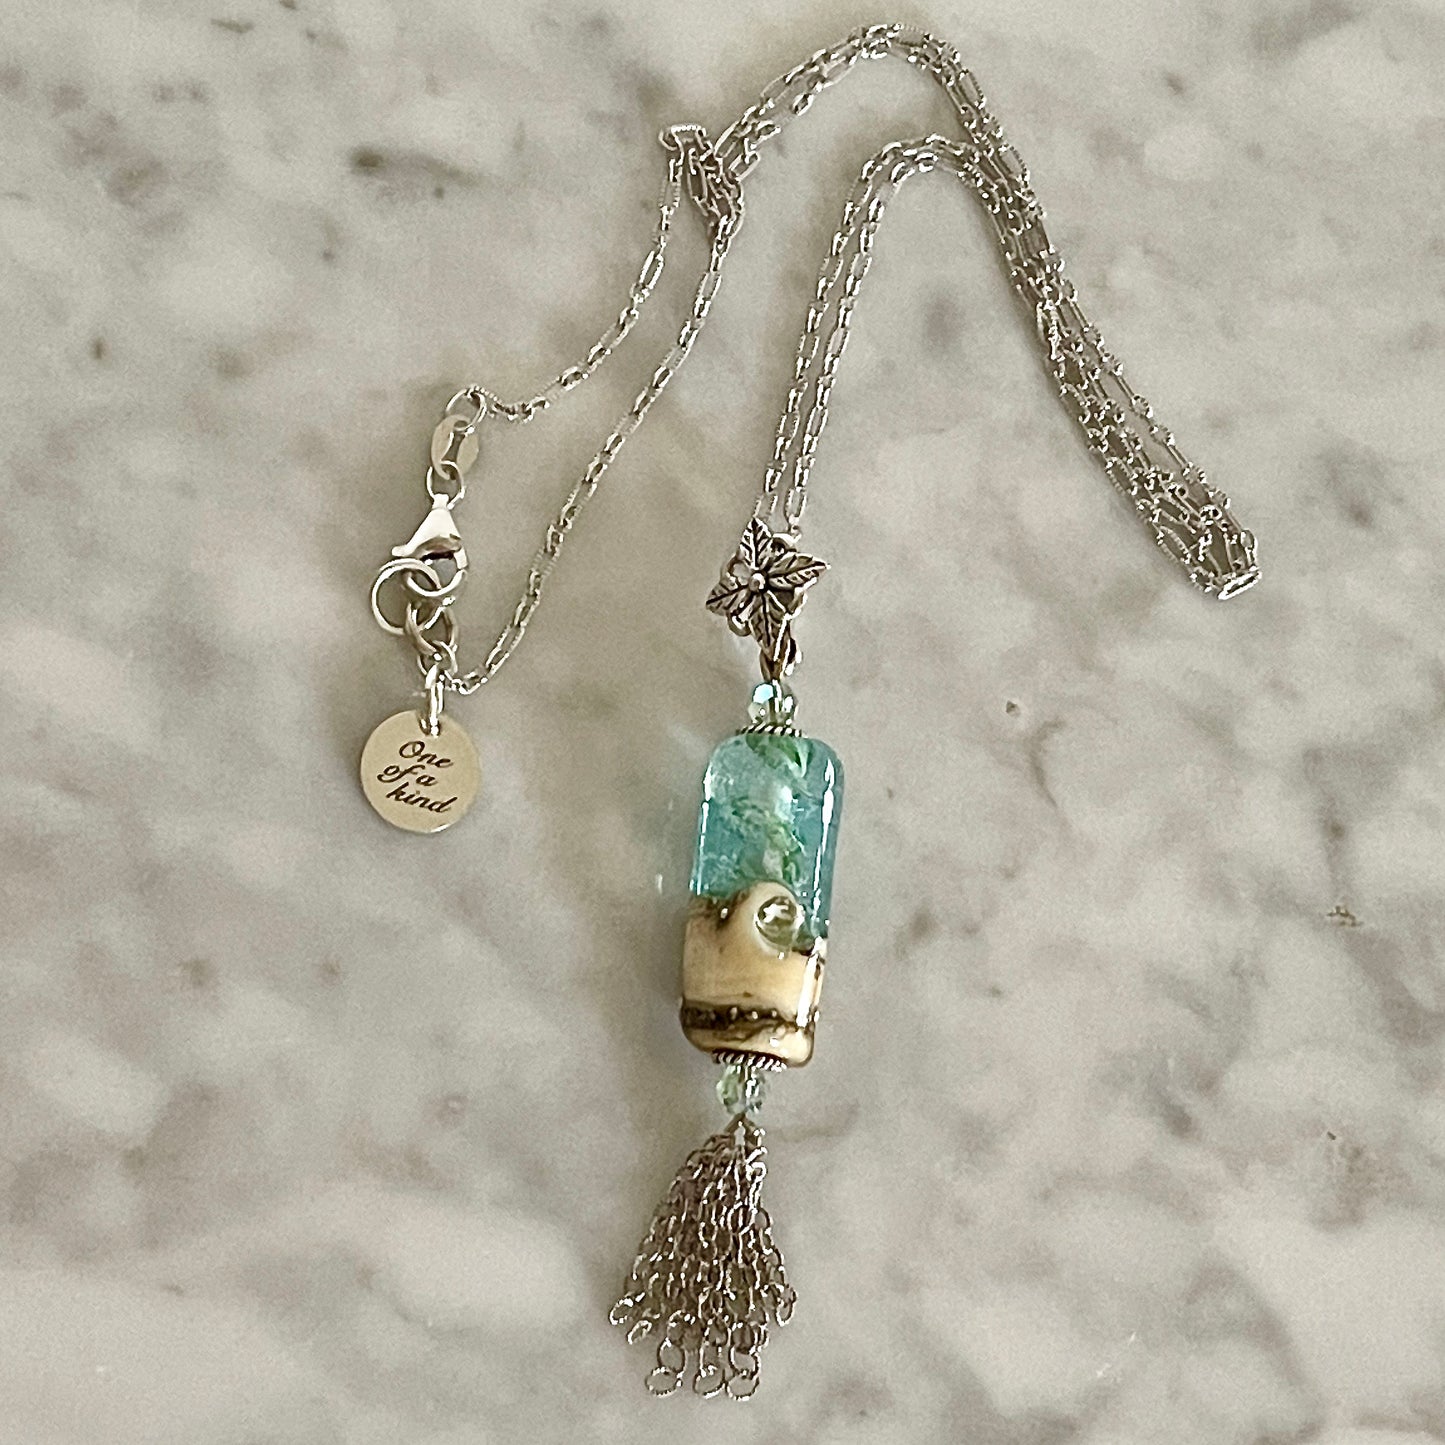 One of a Kind Arpaia Positano beachlove glass & silver tassel pendant necklace